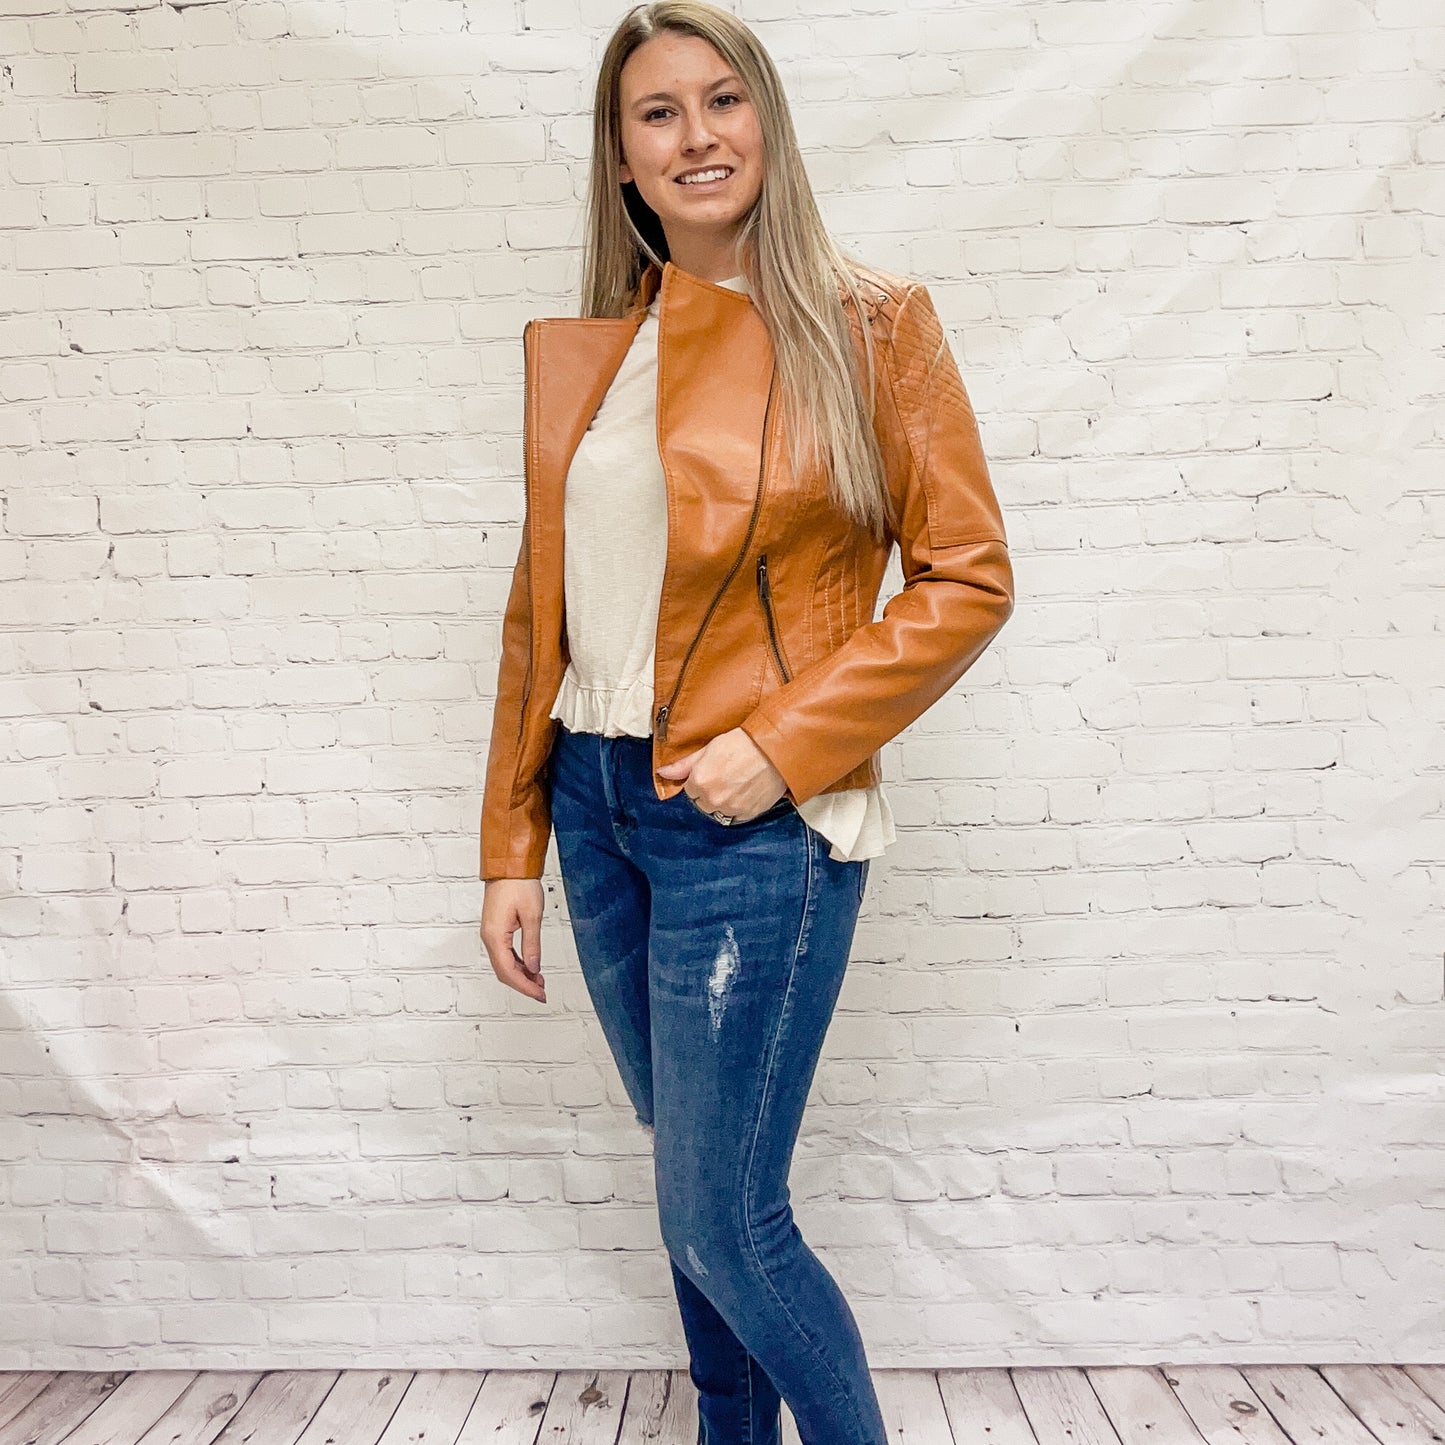 Vegan Leather. Quilted arm detail with lace up shoulders. Moto style sleeves. Diagonal Zippers. womens leather moto jacket vegan leather jacket colored blazer